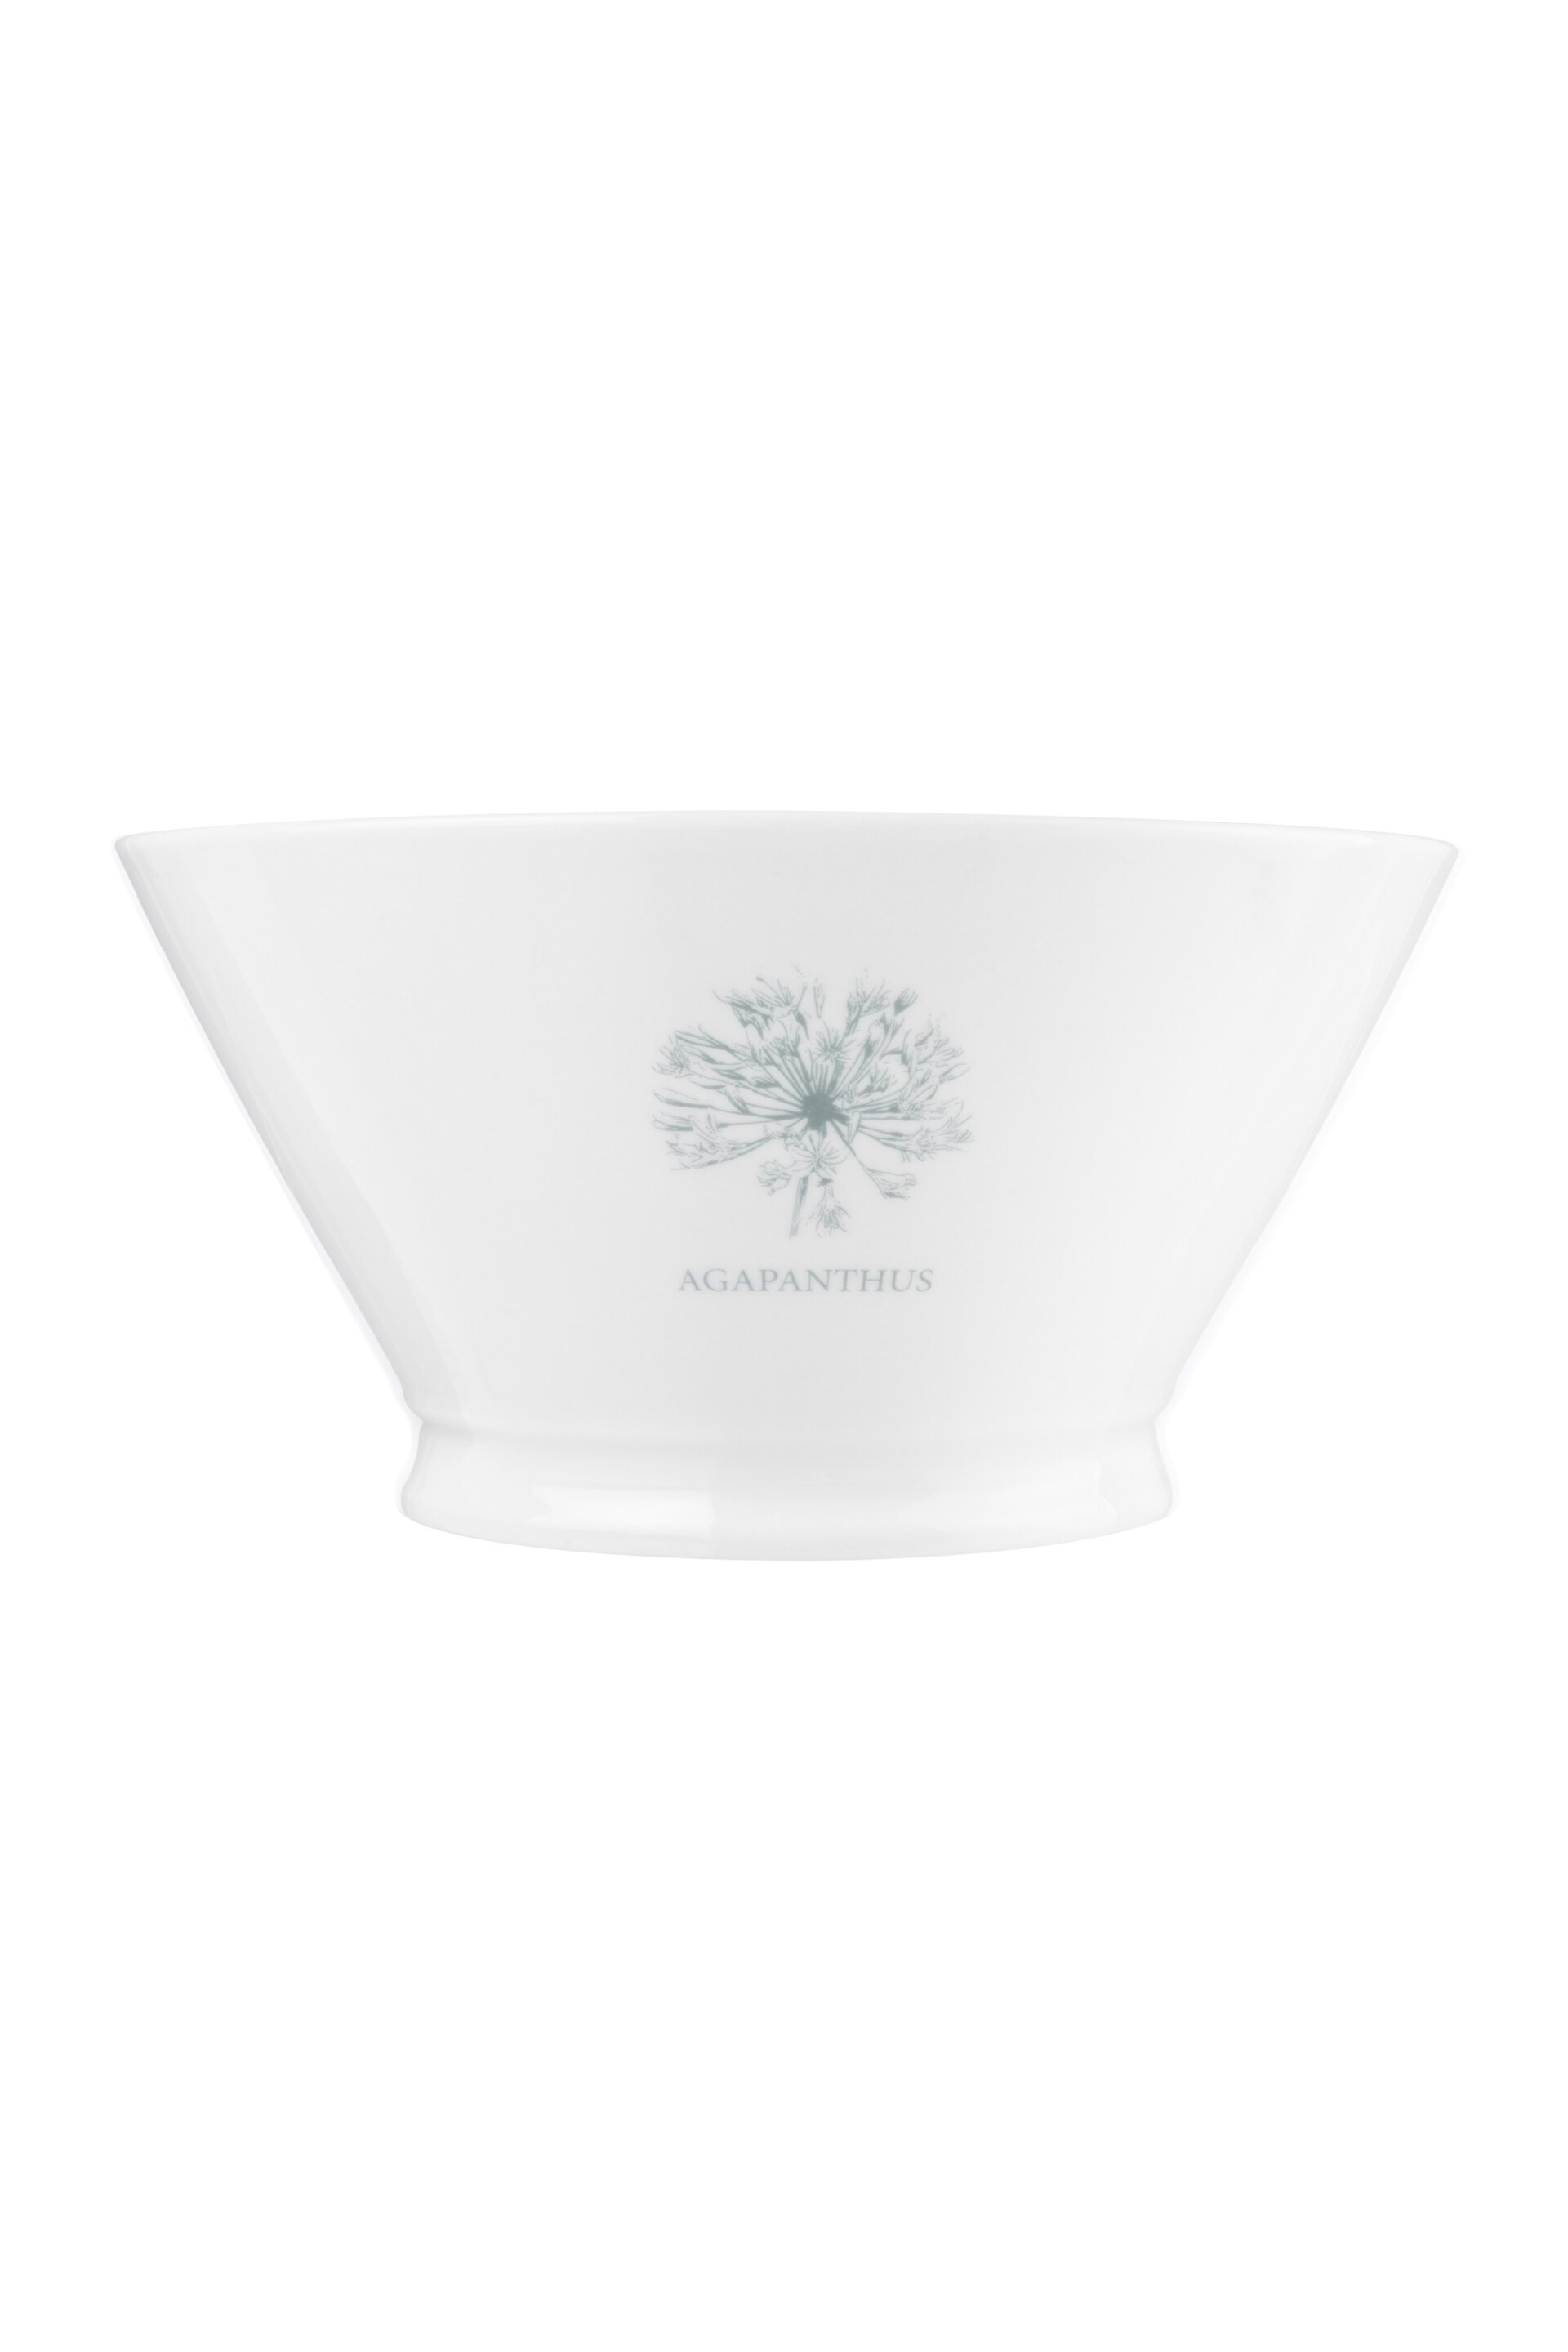 Mary Berry White Garden Agapanthus Large Serving Bowl - Image 3 of 4